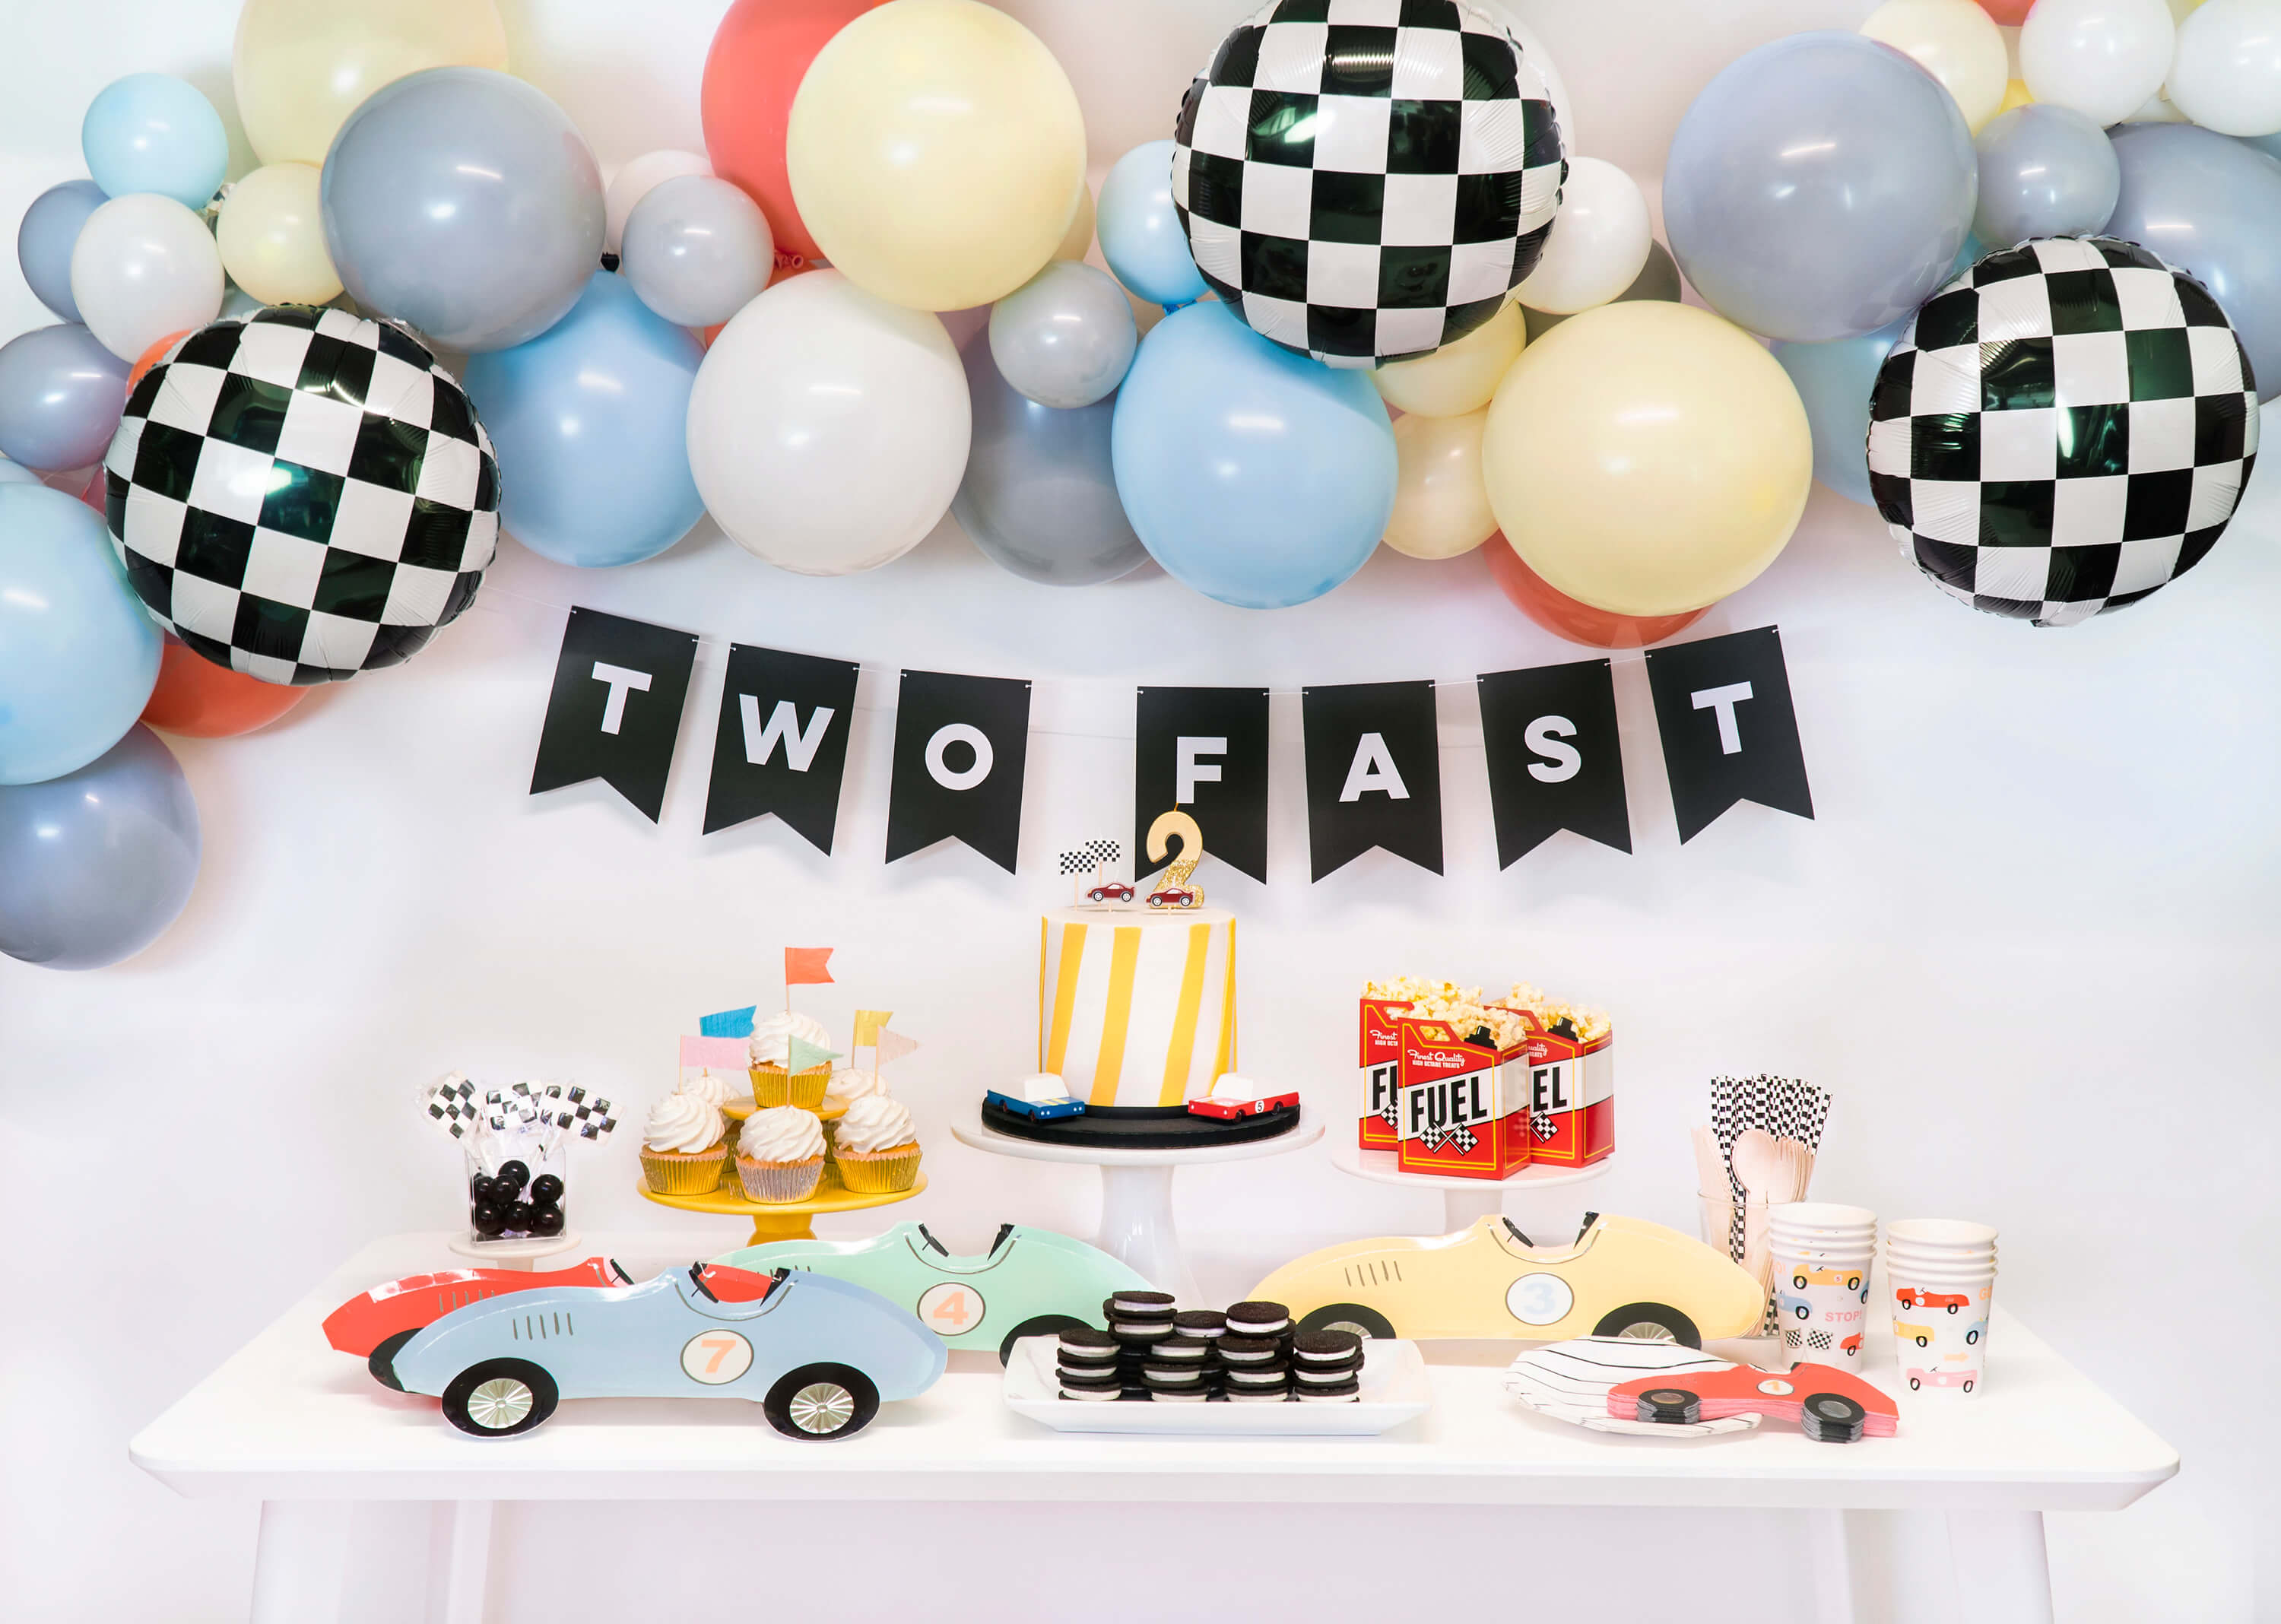 Activities for Kids Birthday Party at Home Fun-Filled & Memorable